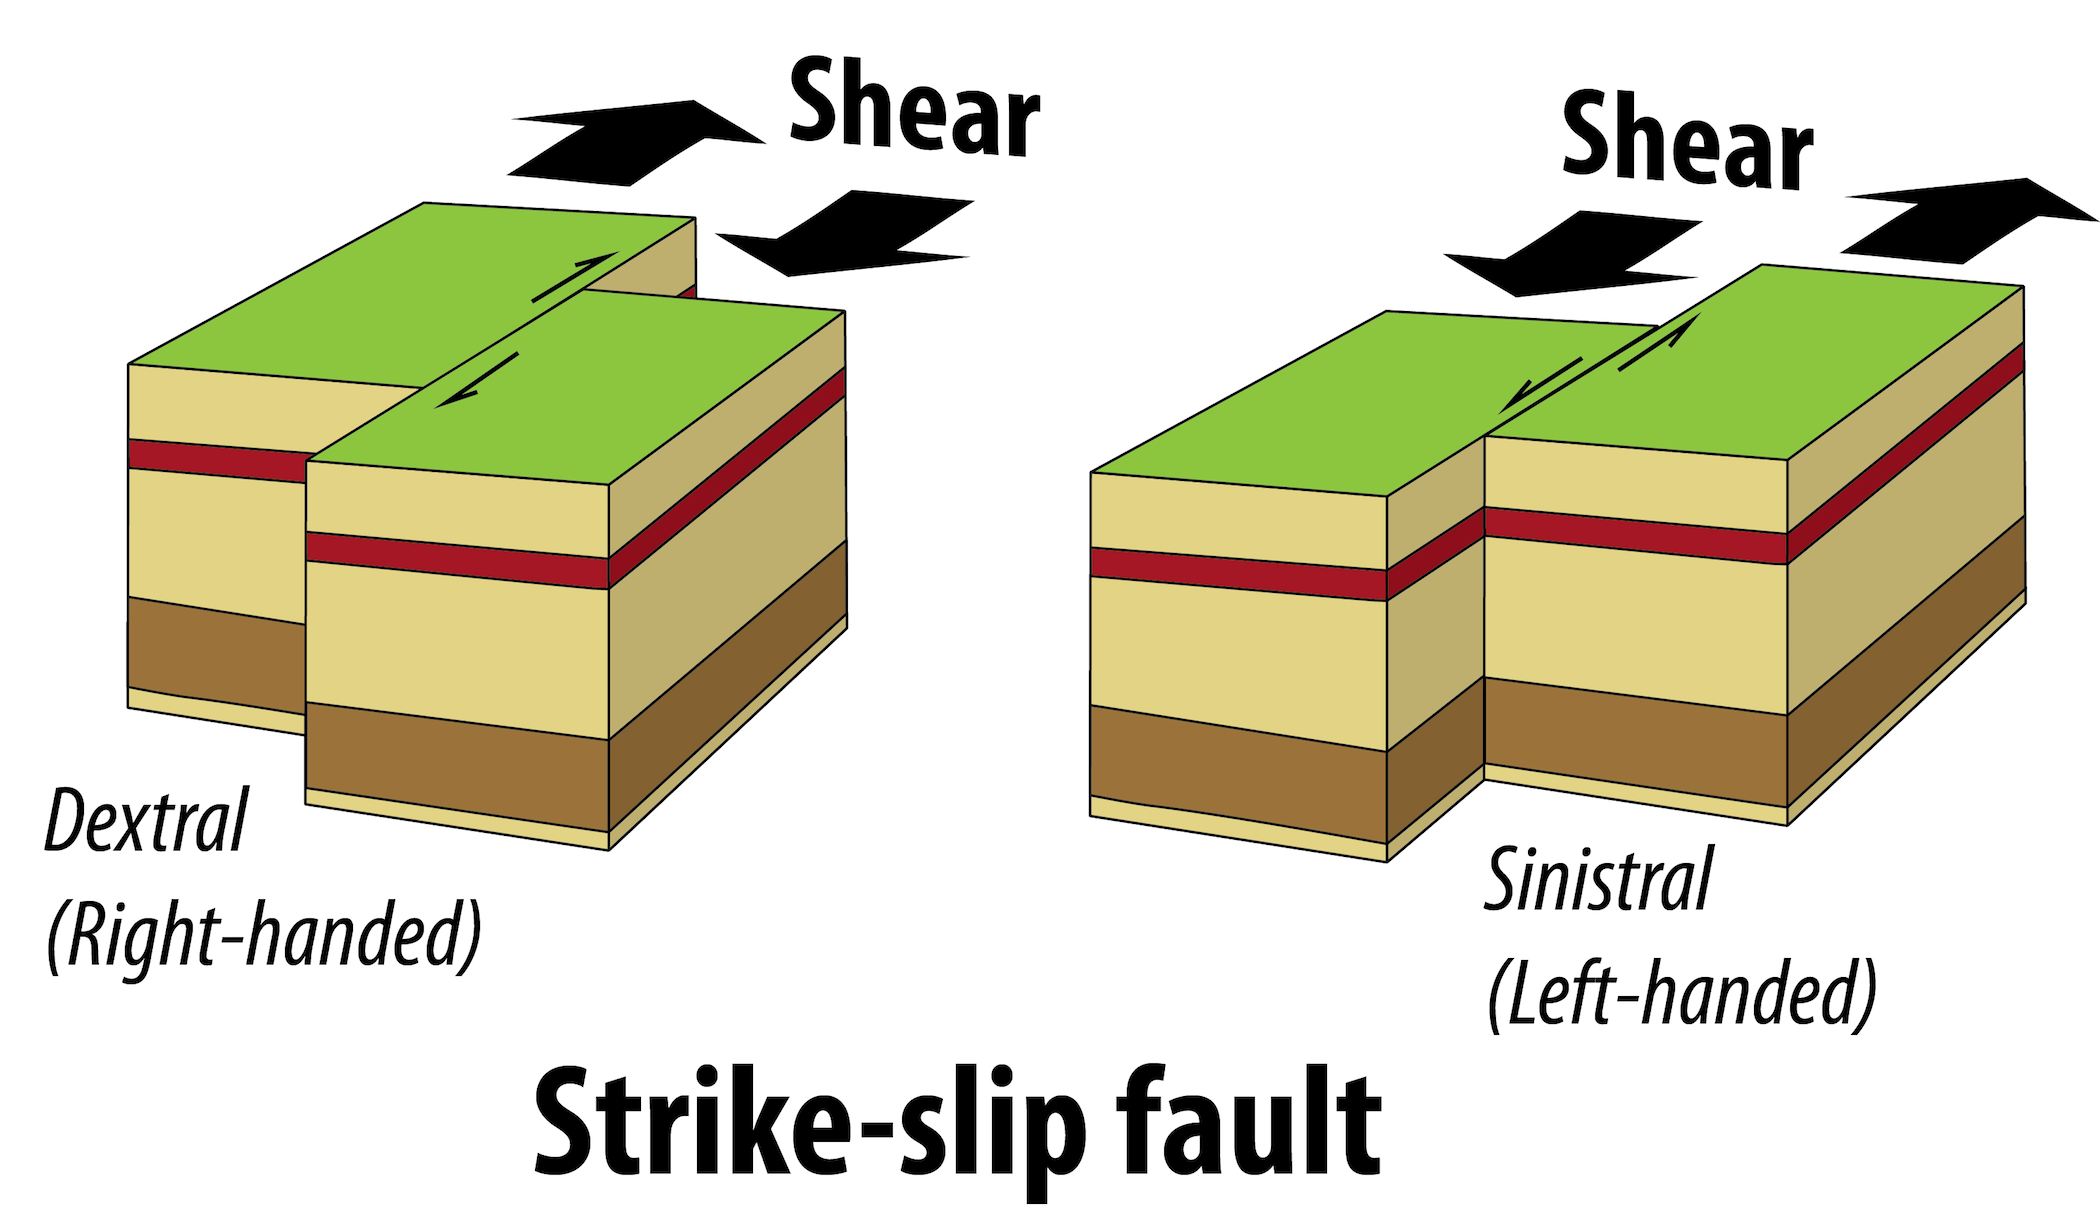 left lateral vs right lateral strike slip fault